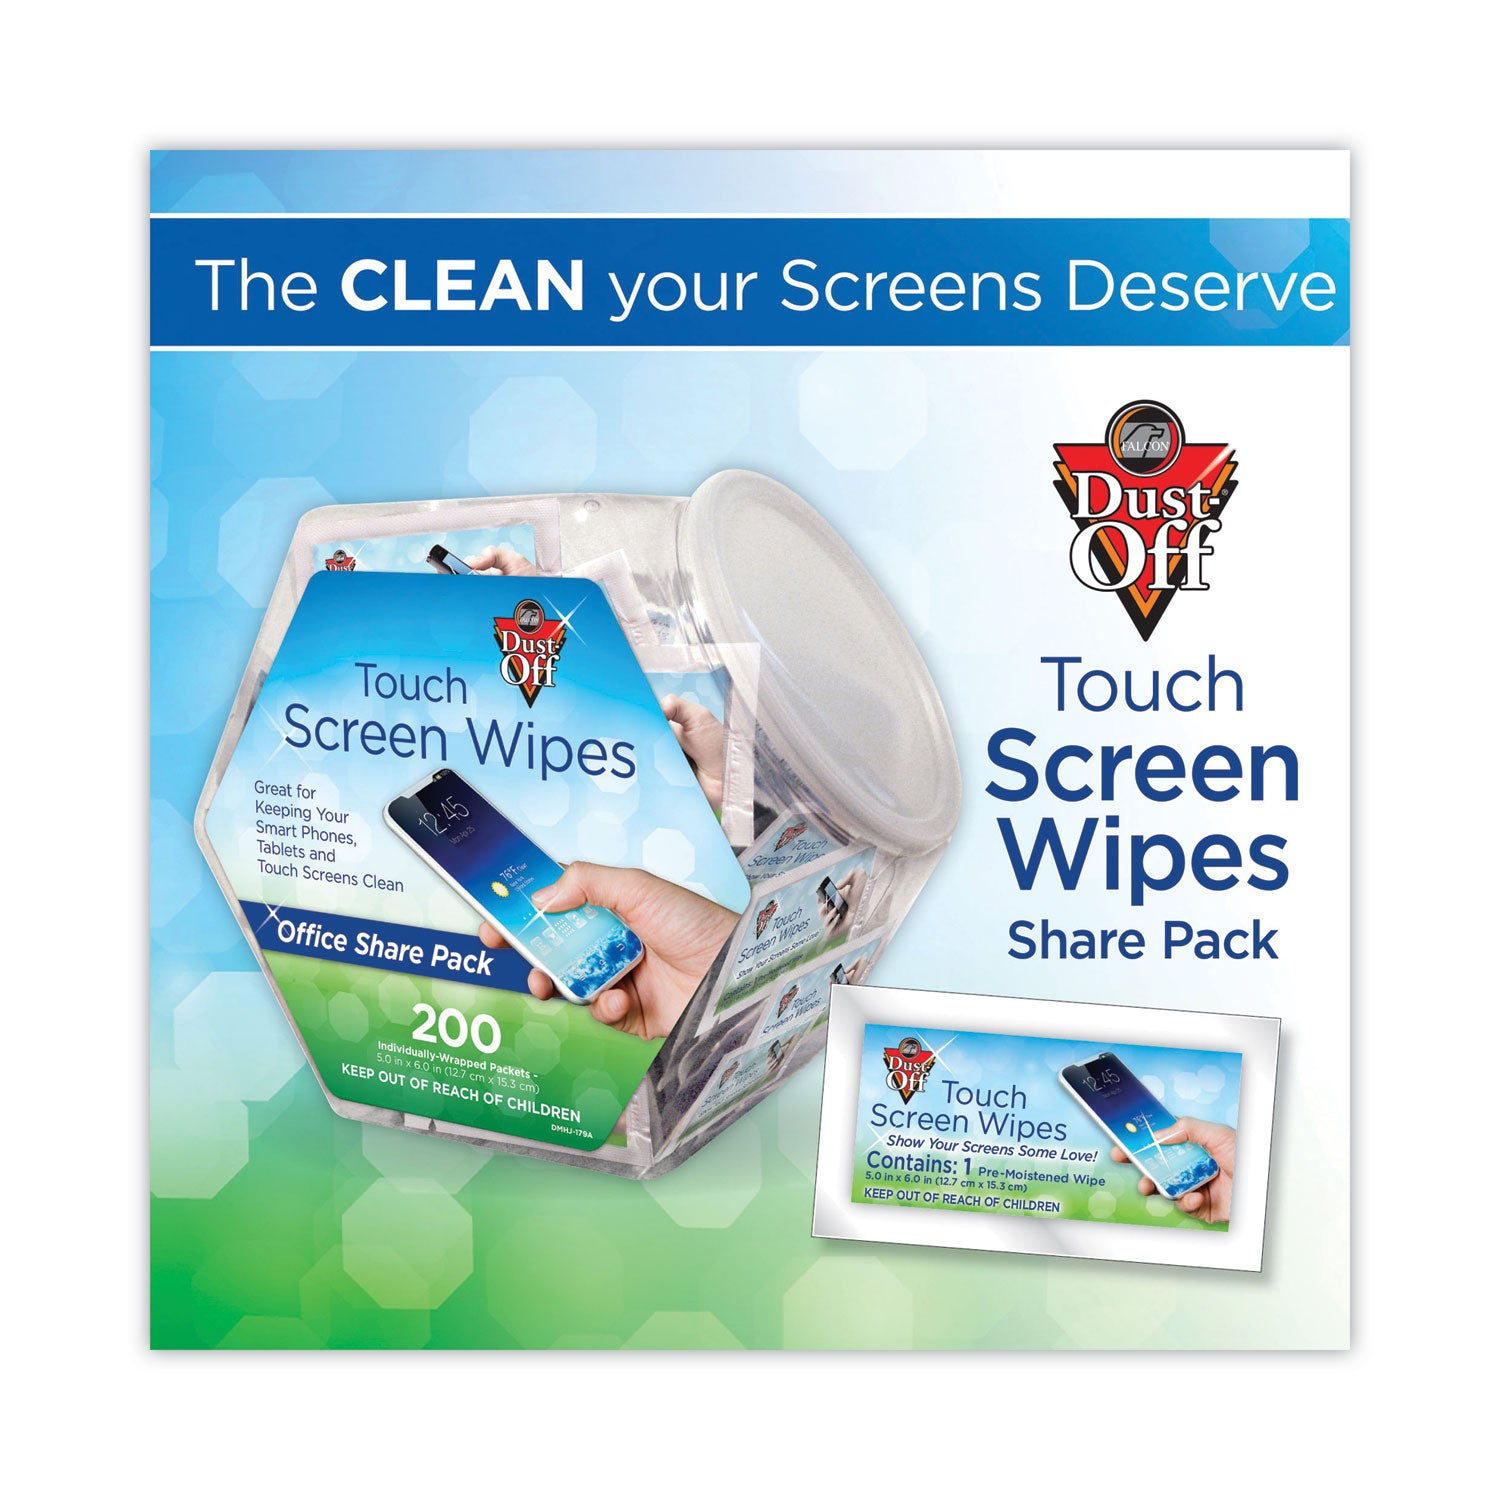 Touch Screen Wipes, 5 x 6, Citrus, 200 Individual Foil Packets in an Easy Grab Jar - 